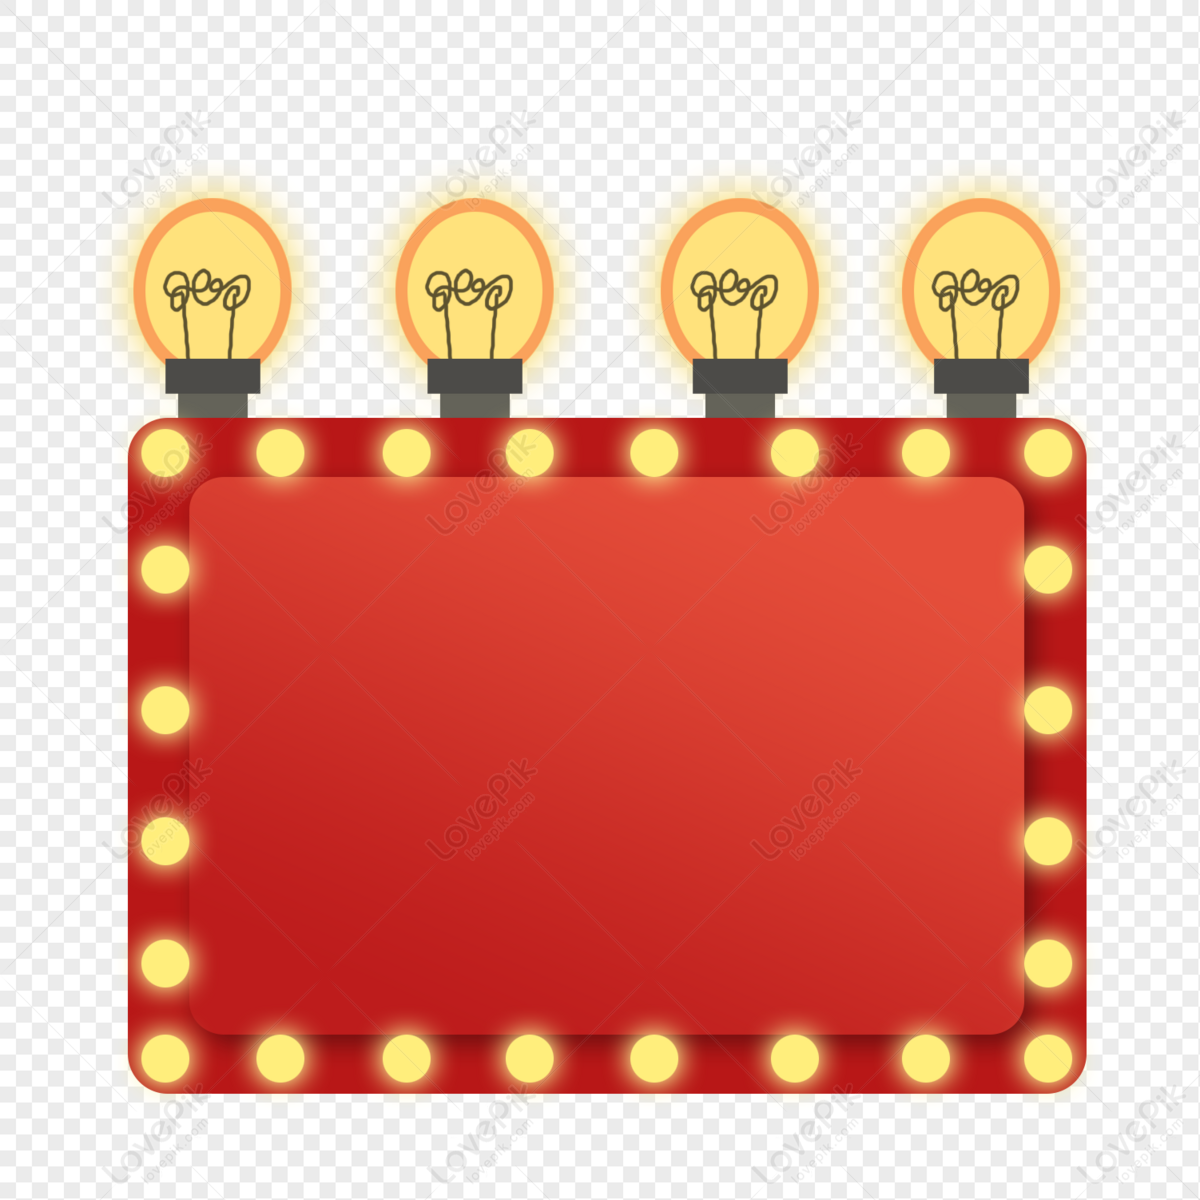 Cartoon Glowing Light Bulb Red Border PNG Transparent Background And  Clipart Image For Free Download - Lovepik | 401555580